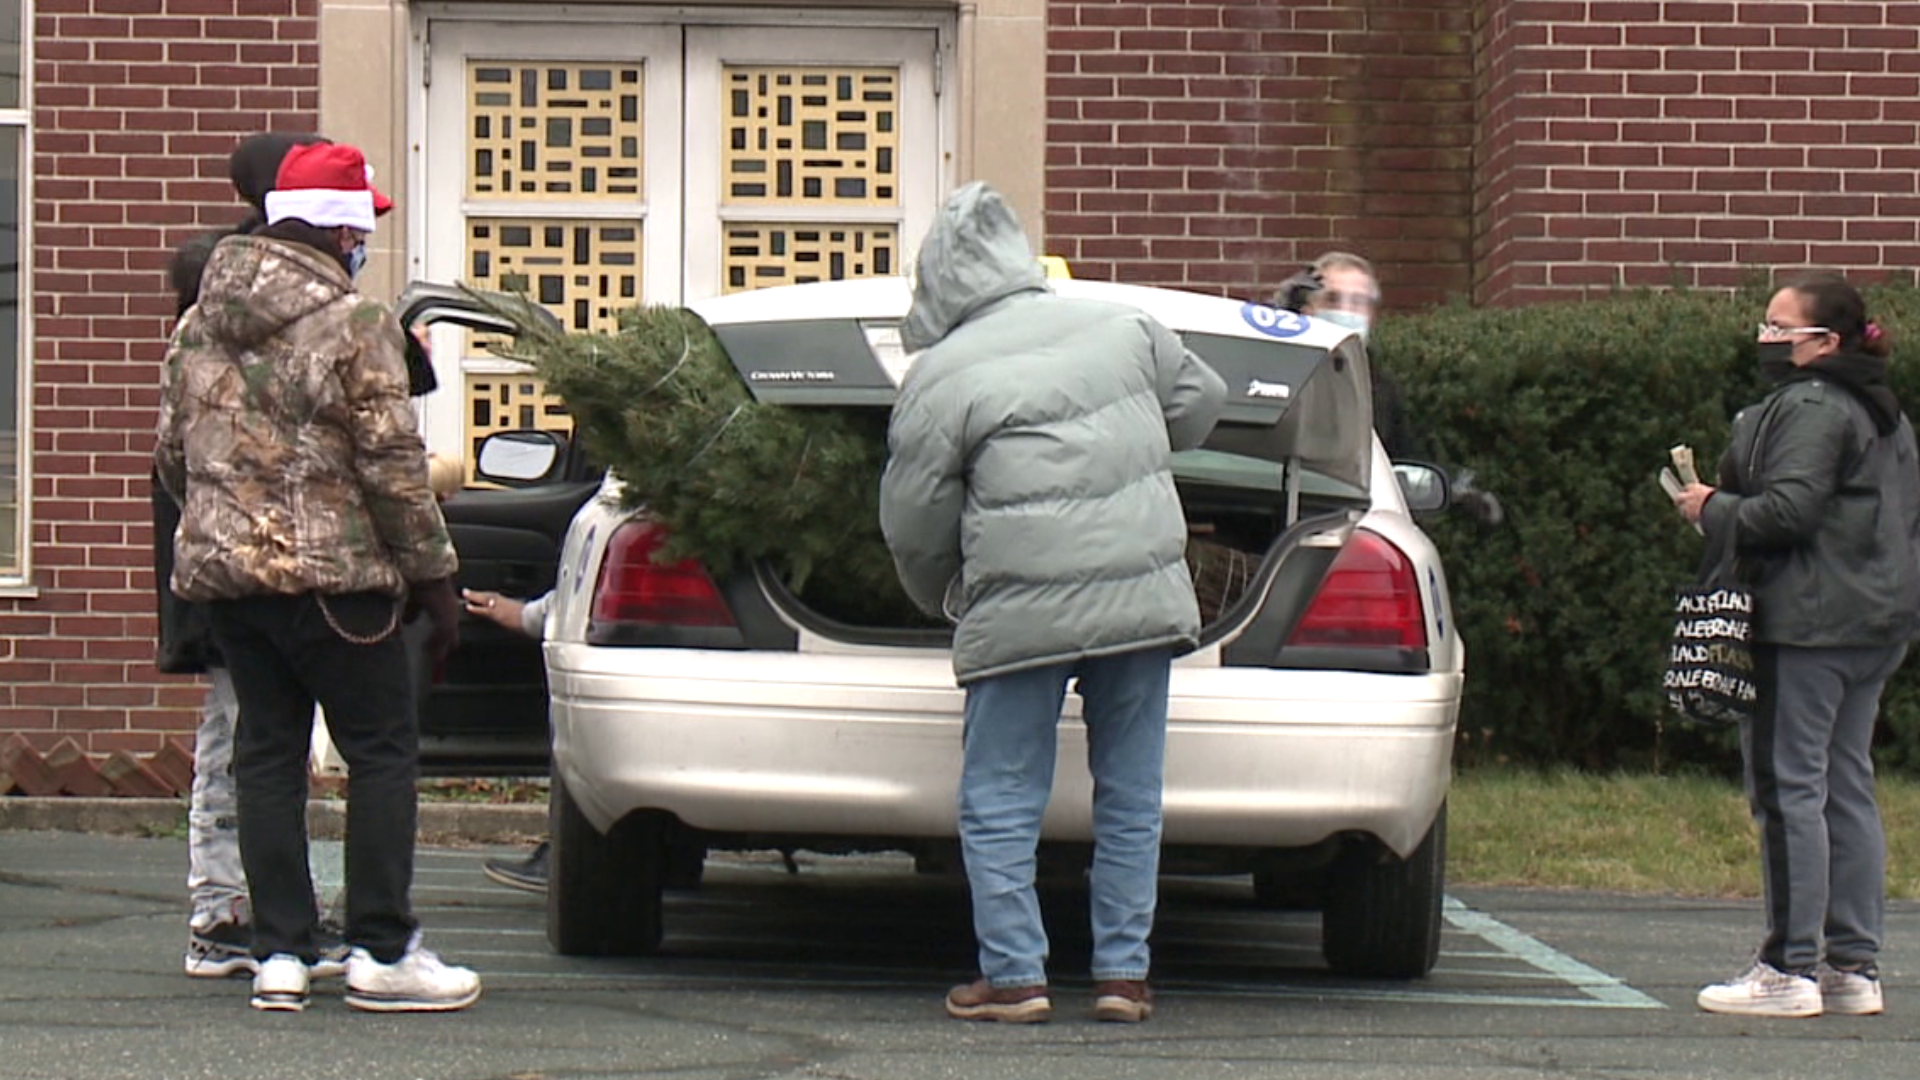 Friends Can Make It Happen gave away 30 Christmas trees Saturday in Luzerne County.